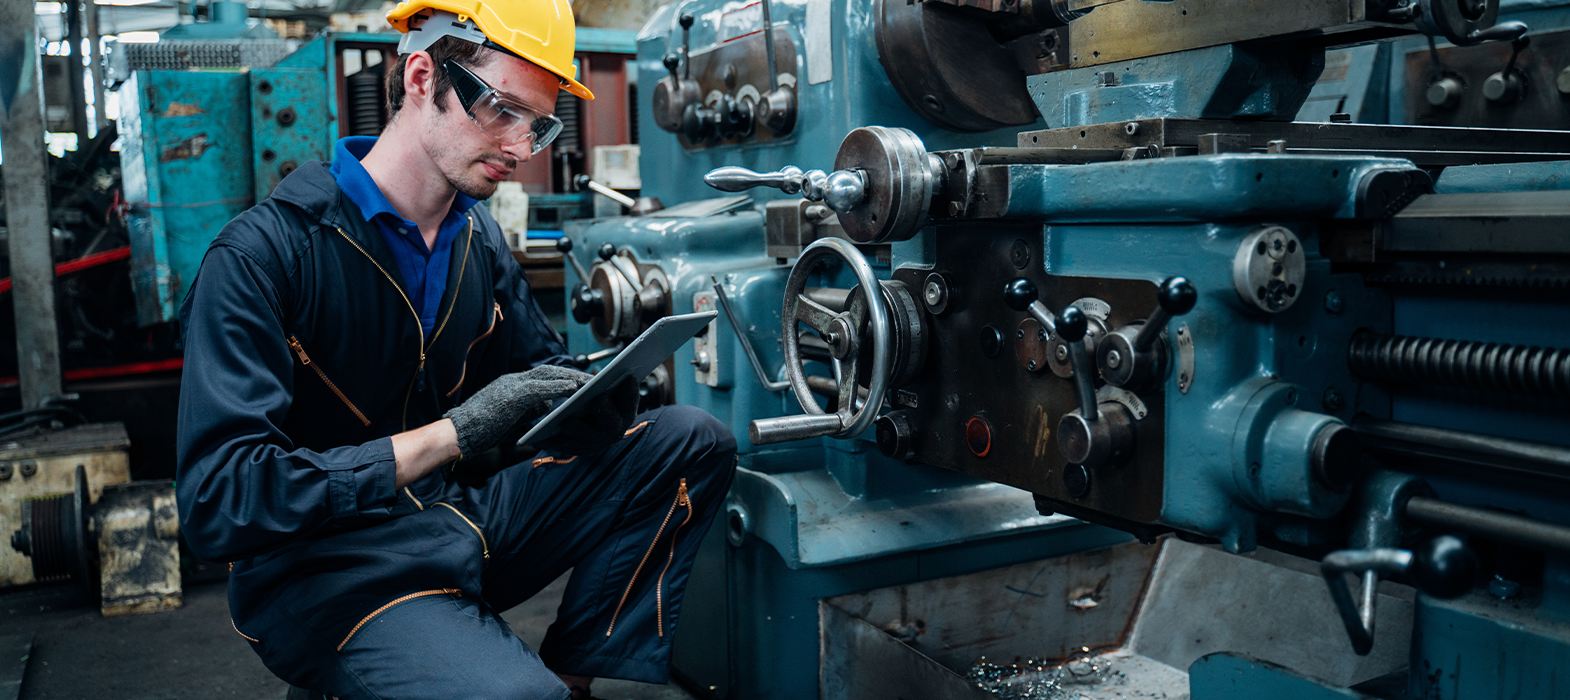 3 Big Benefits of Mobile CMMS for Facility Maintenance Managers